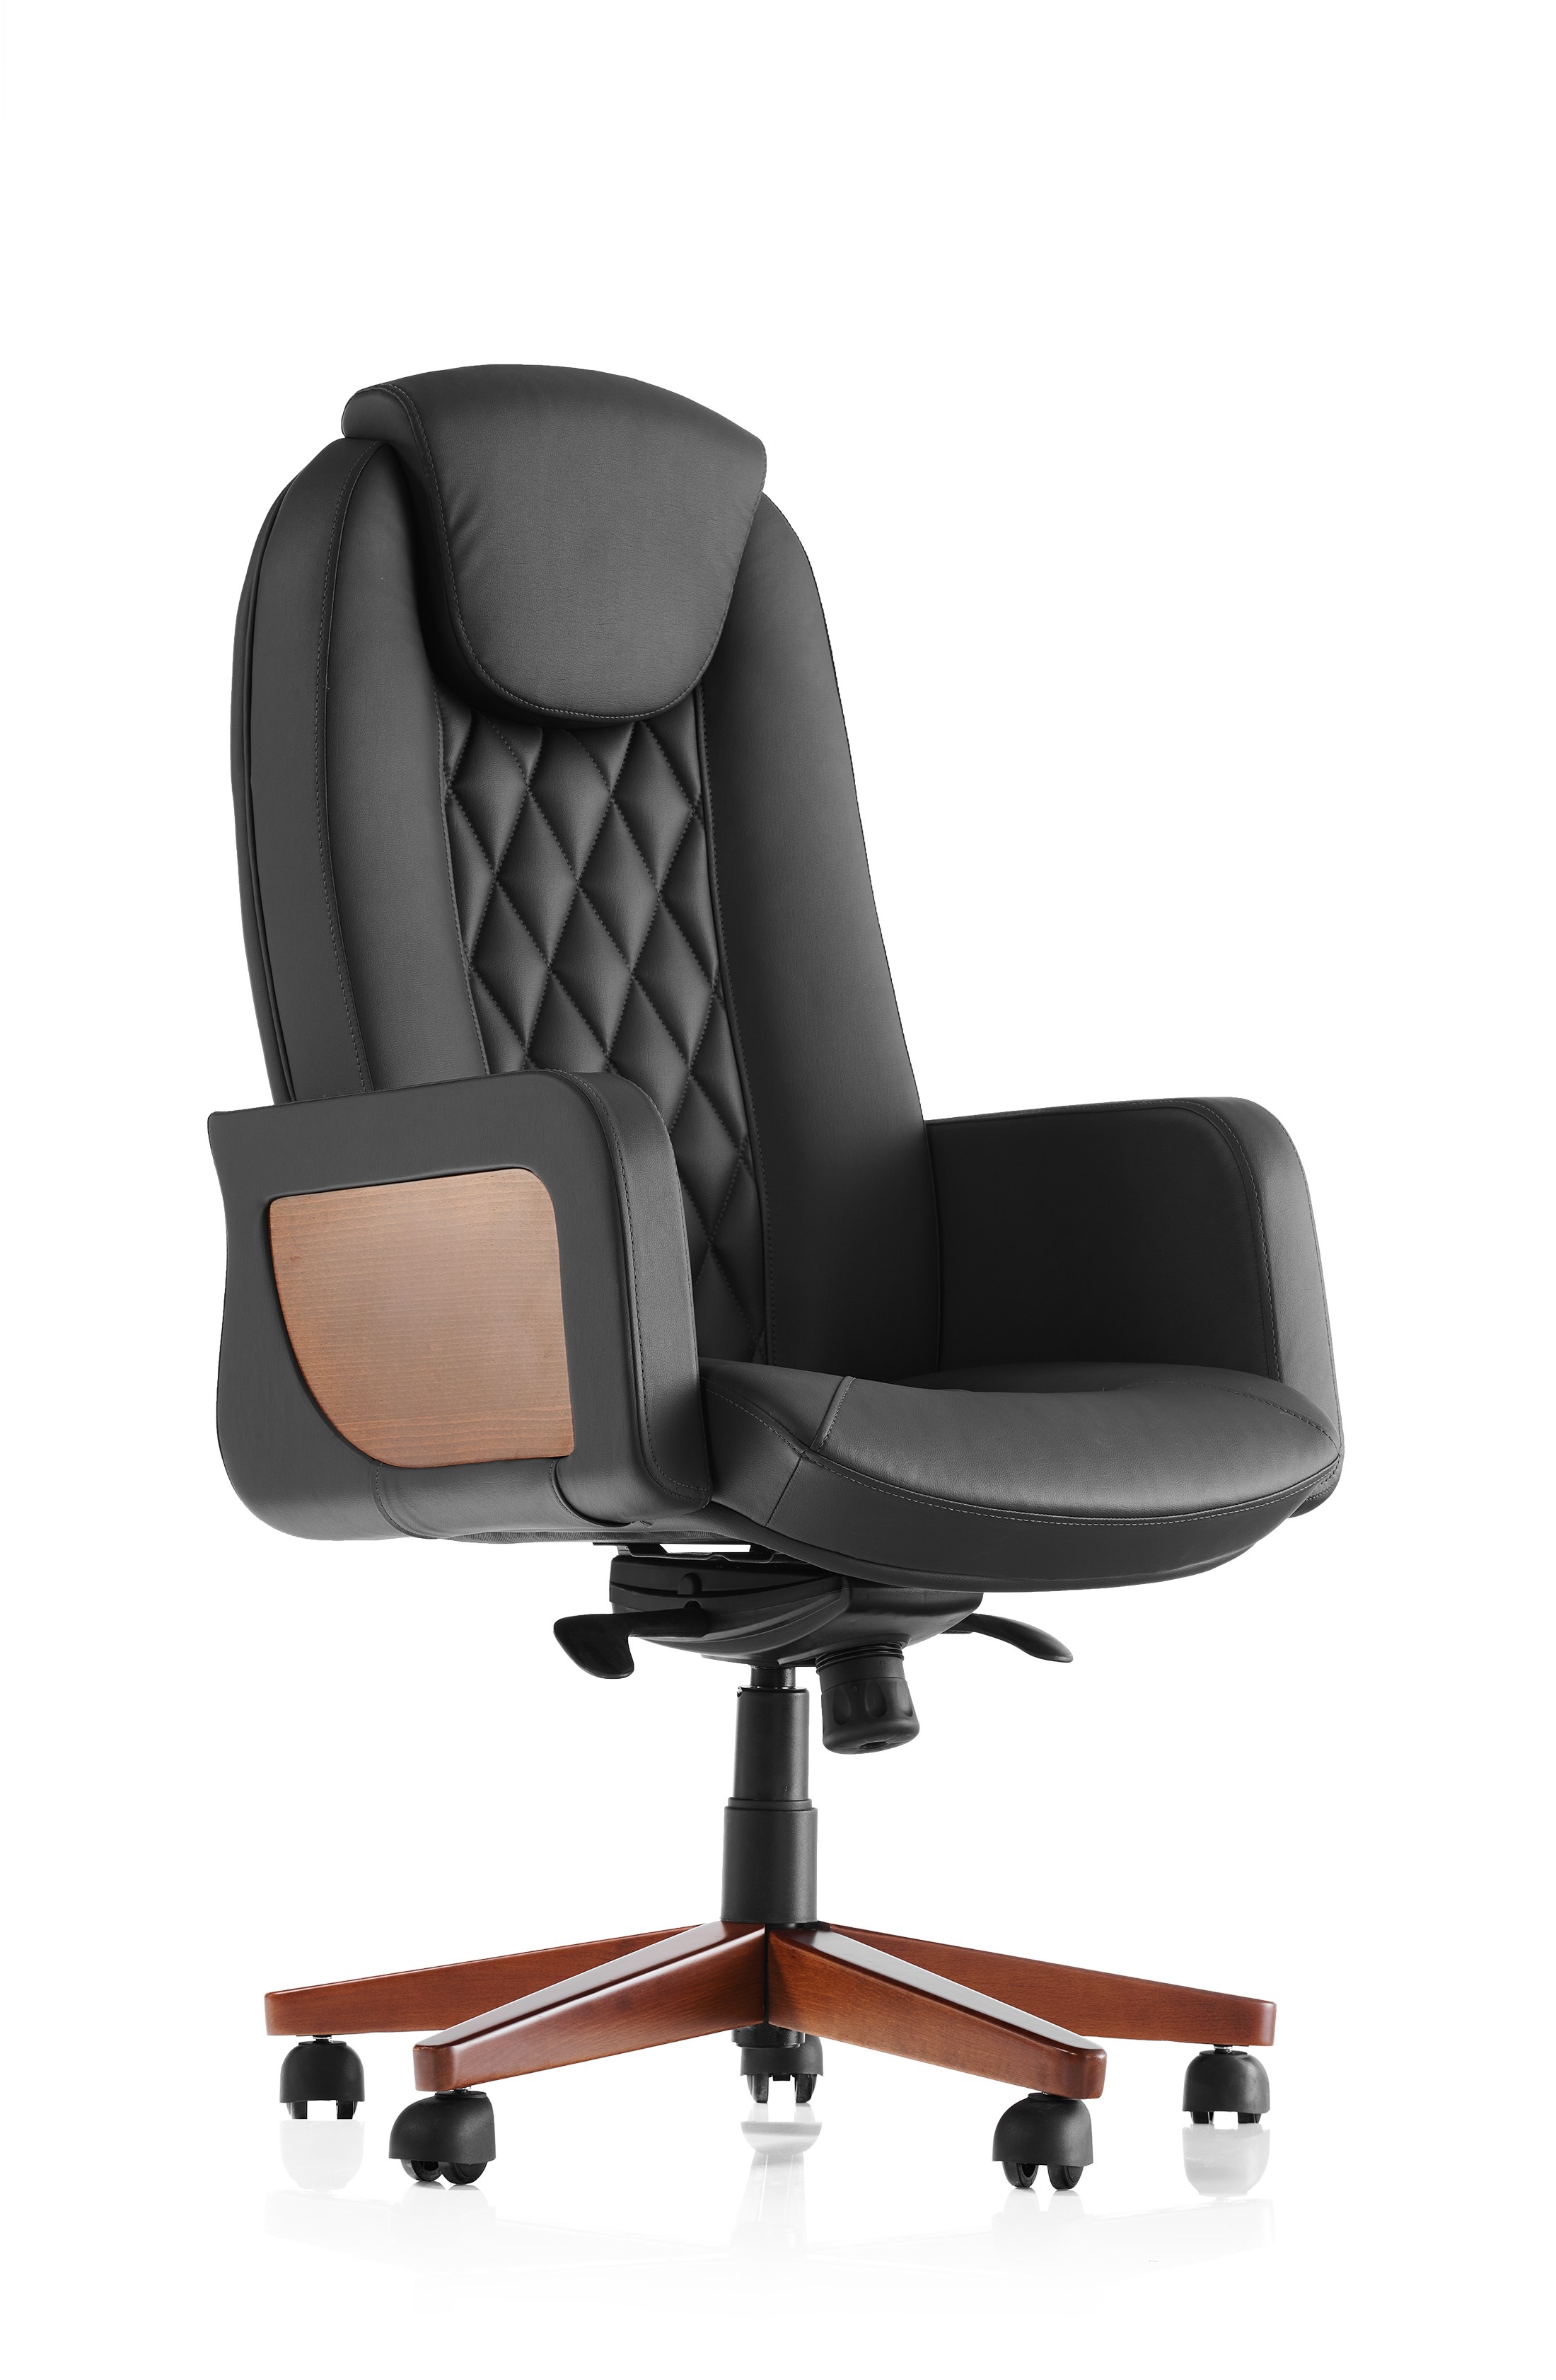 OXXO 000N MANAGER CHAIR